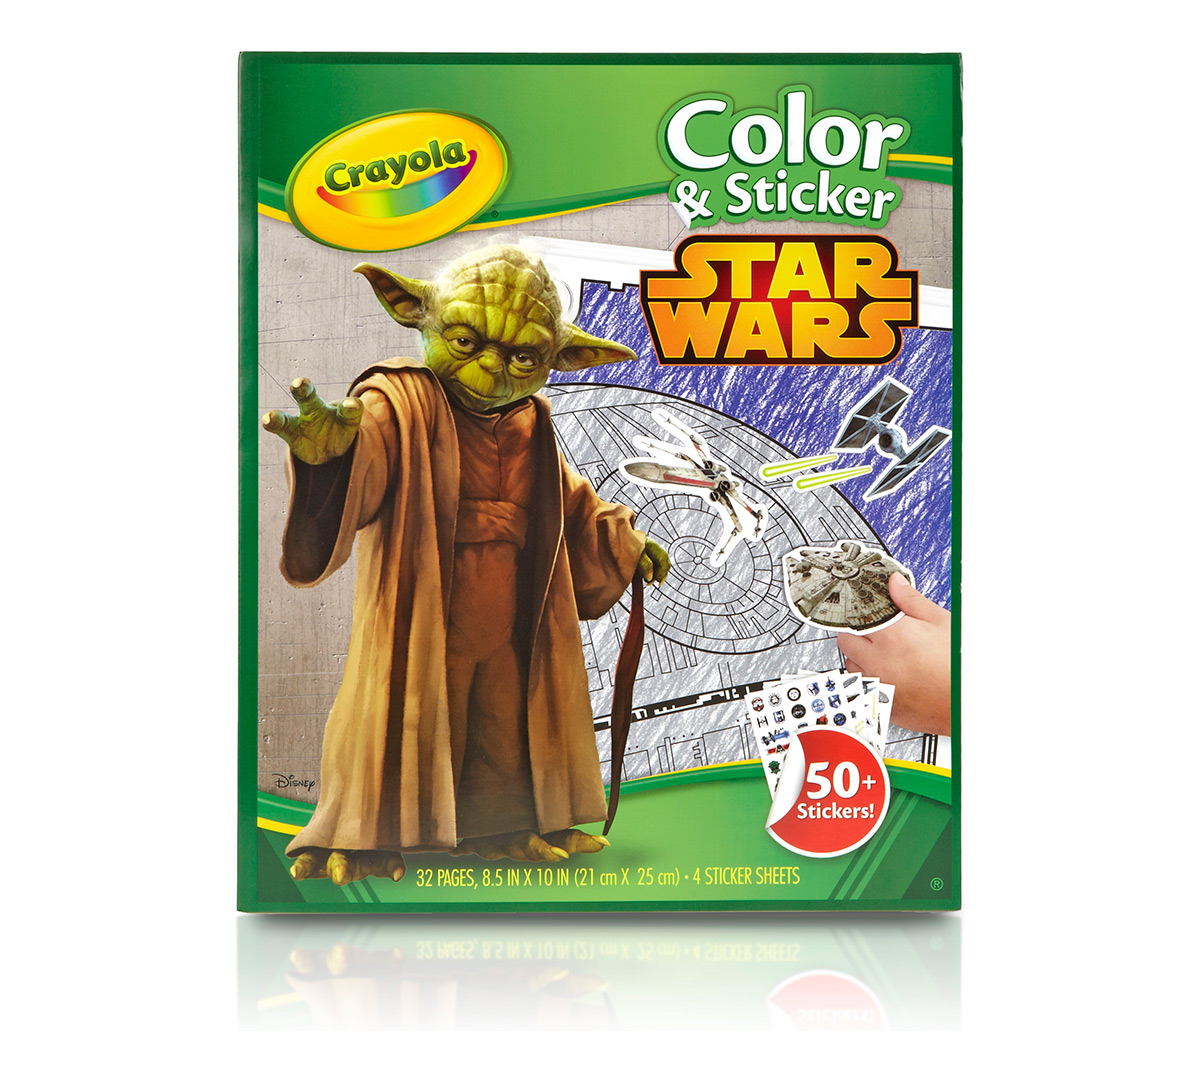 STICKERS IDEAL PARTY BAG GIFT 50 CRAYOLA STAR WARS COLOUR & STICKER BOOK 